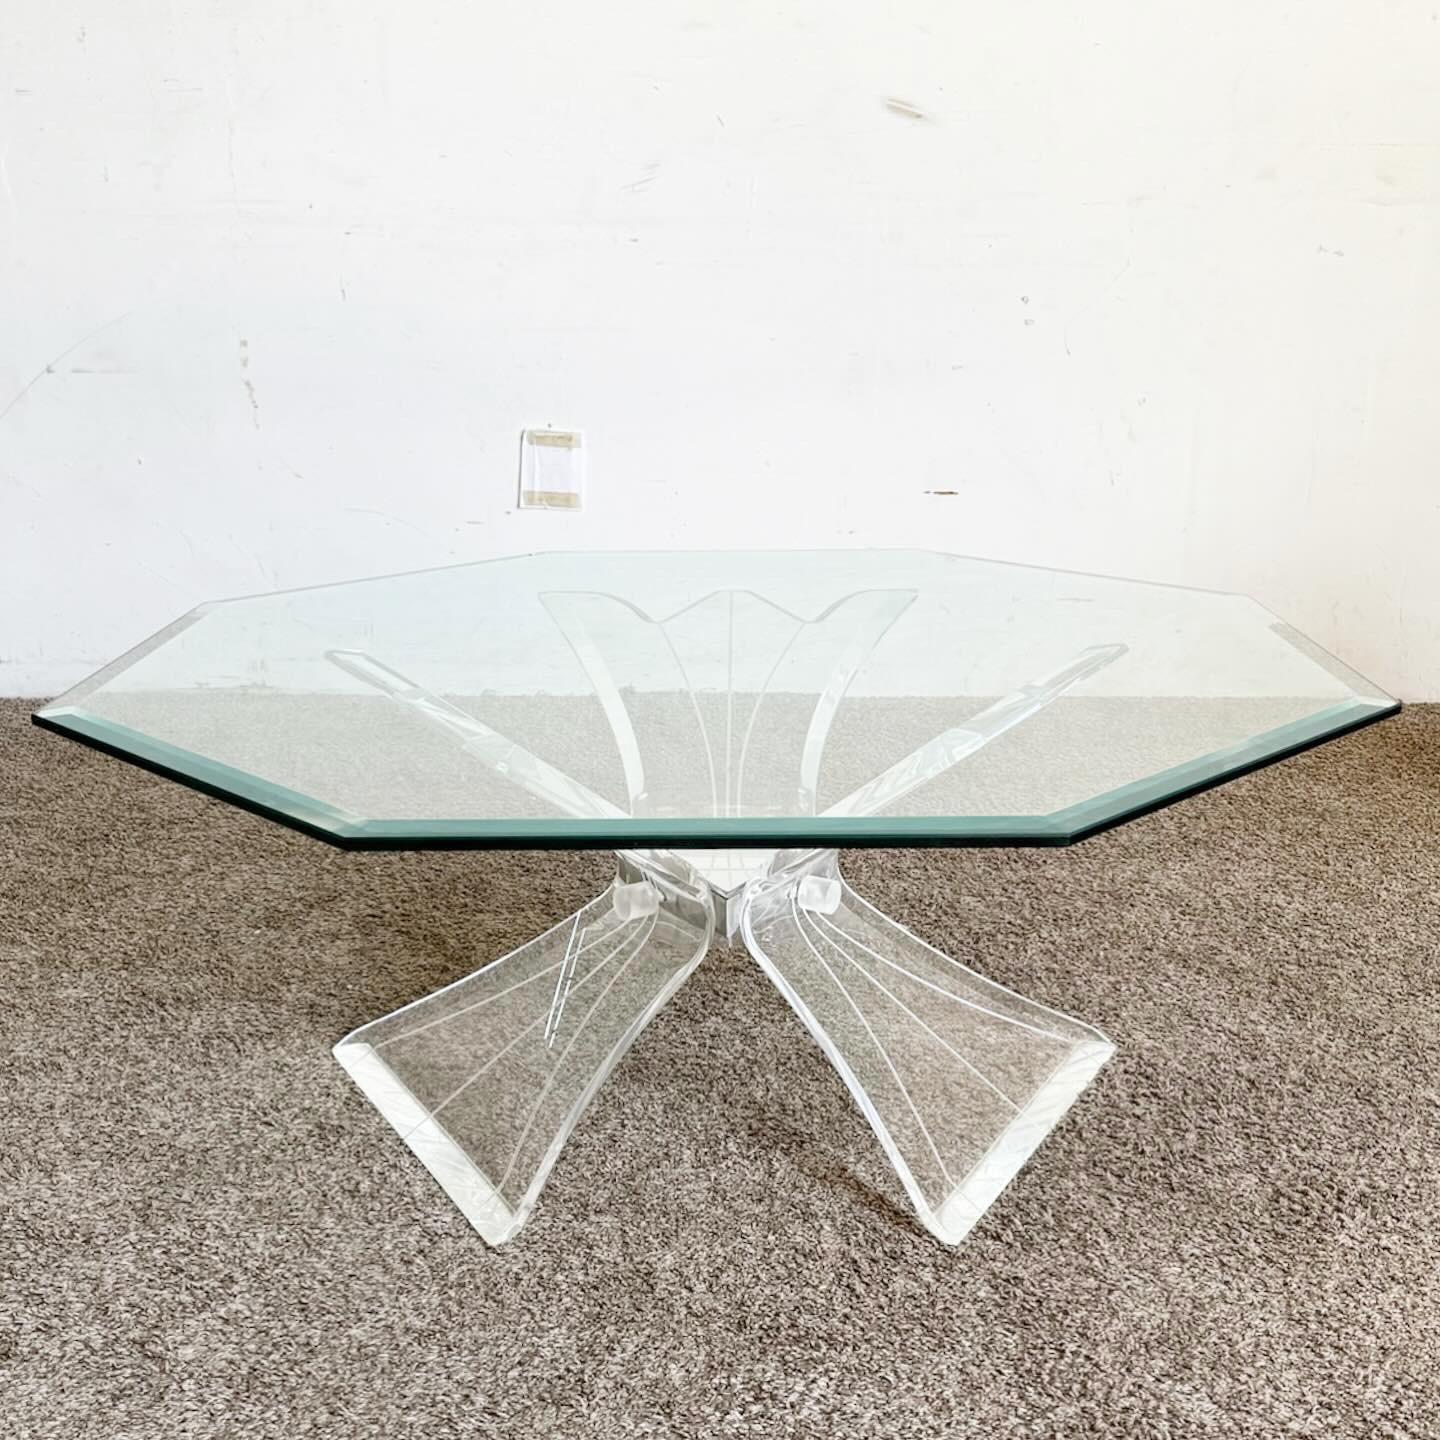 The Postmodern Octagonal Beveled Glass Top Lucite Coffee Table is a testament to bold postmodern design. Its unique octagonal shape and transparent lucite frame create a striking, modern look. The beveled glass top adds sophistication, while the